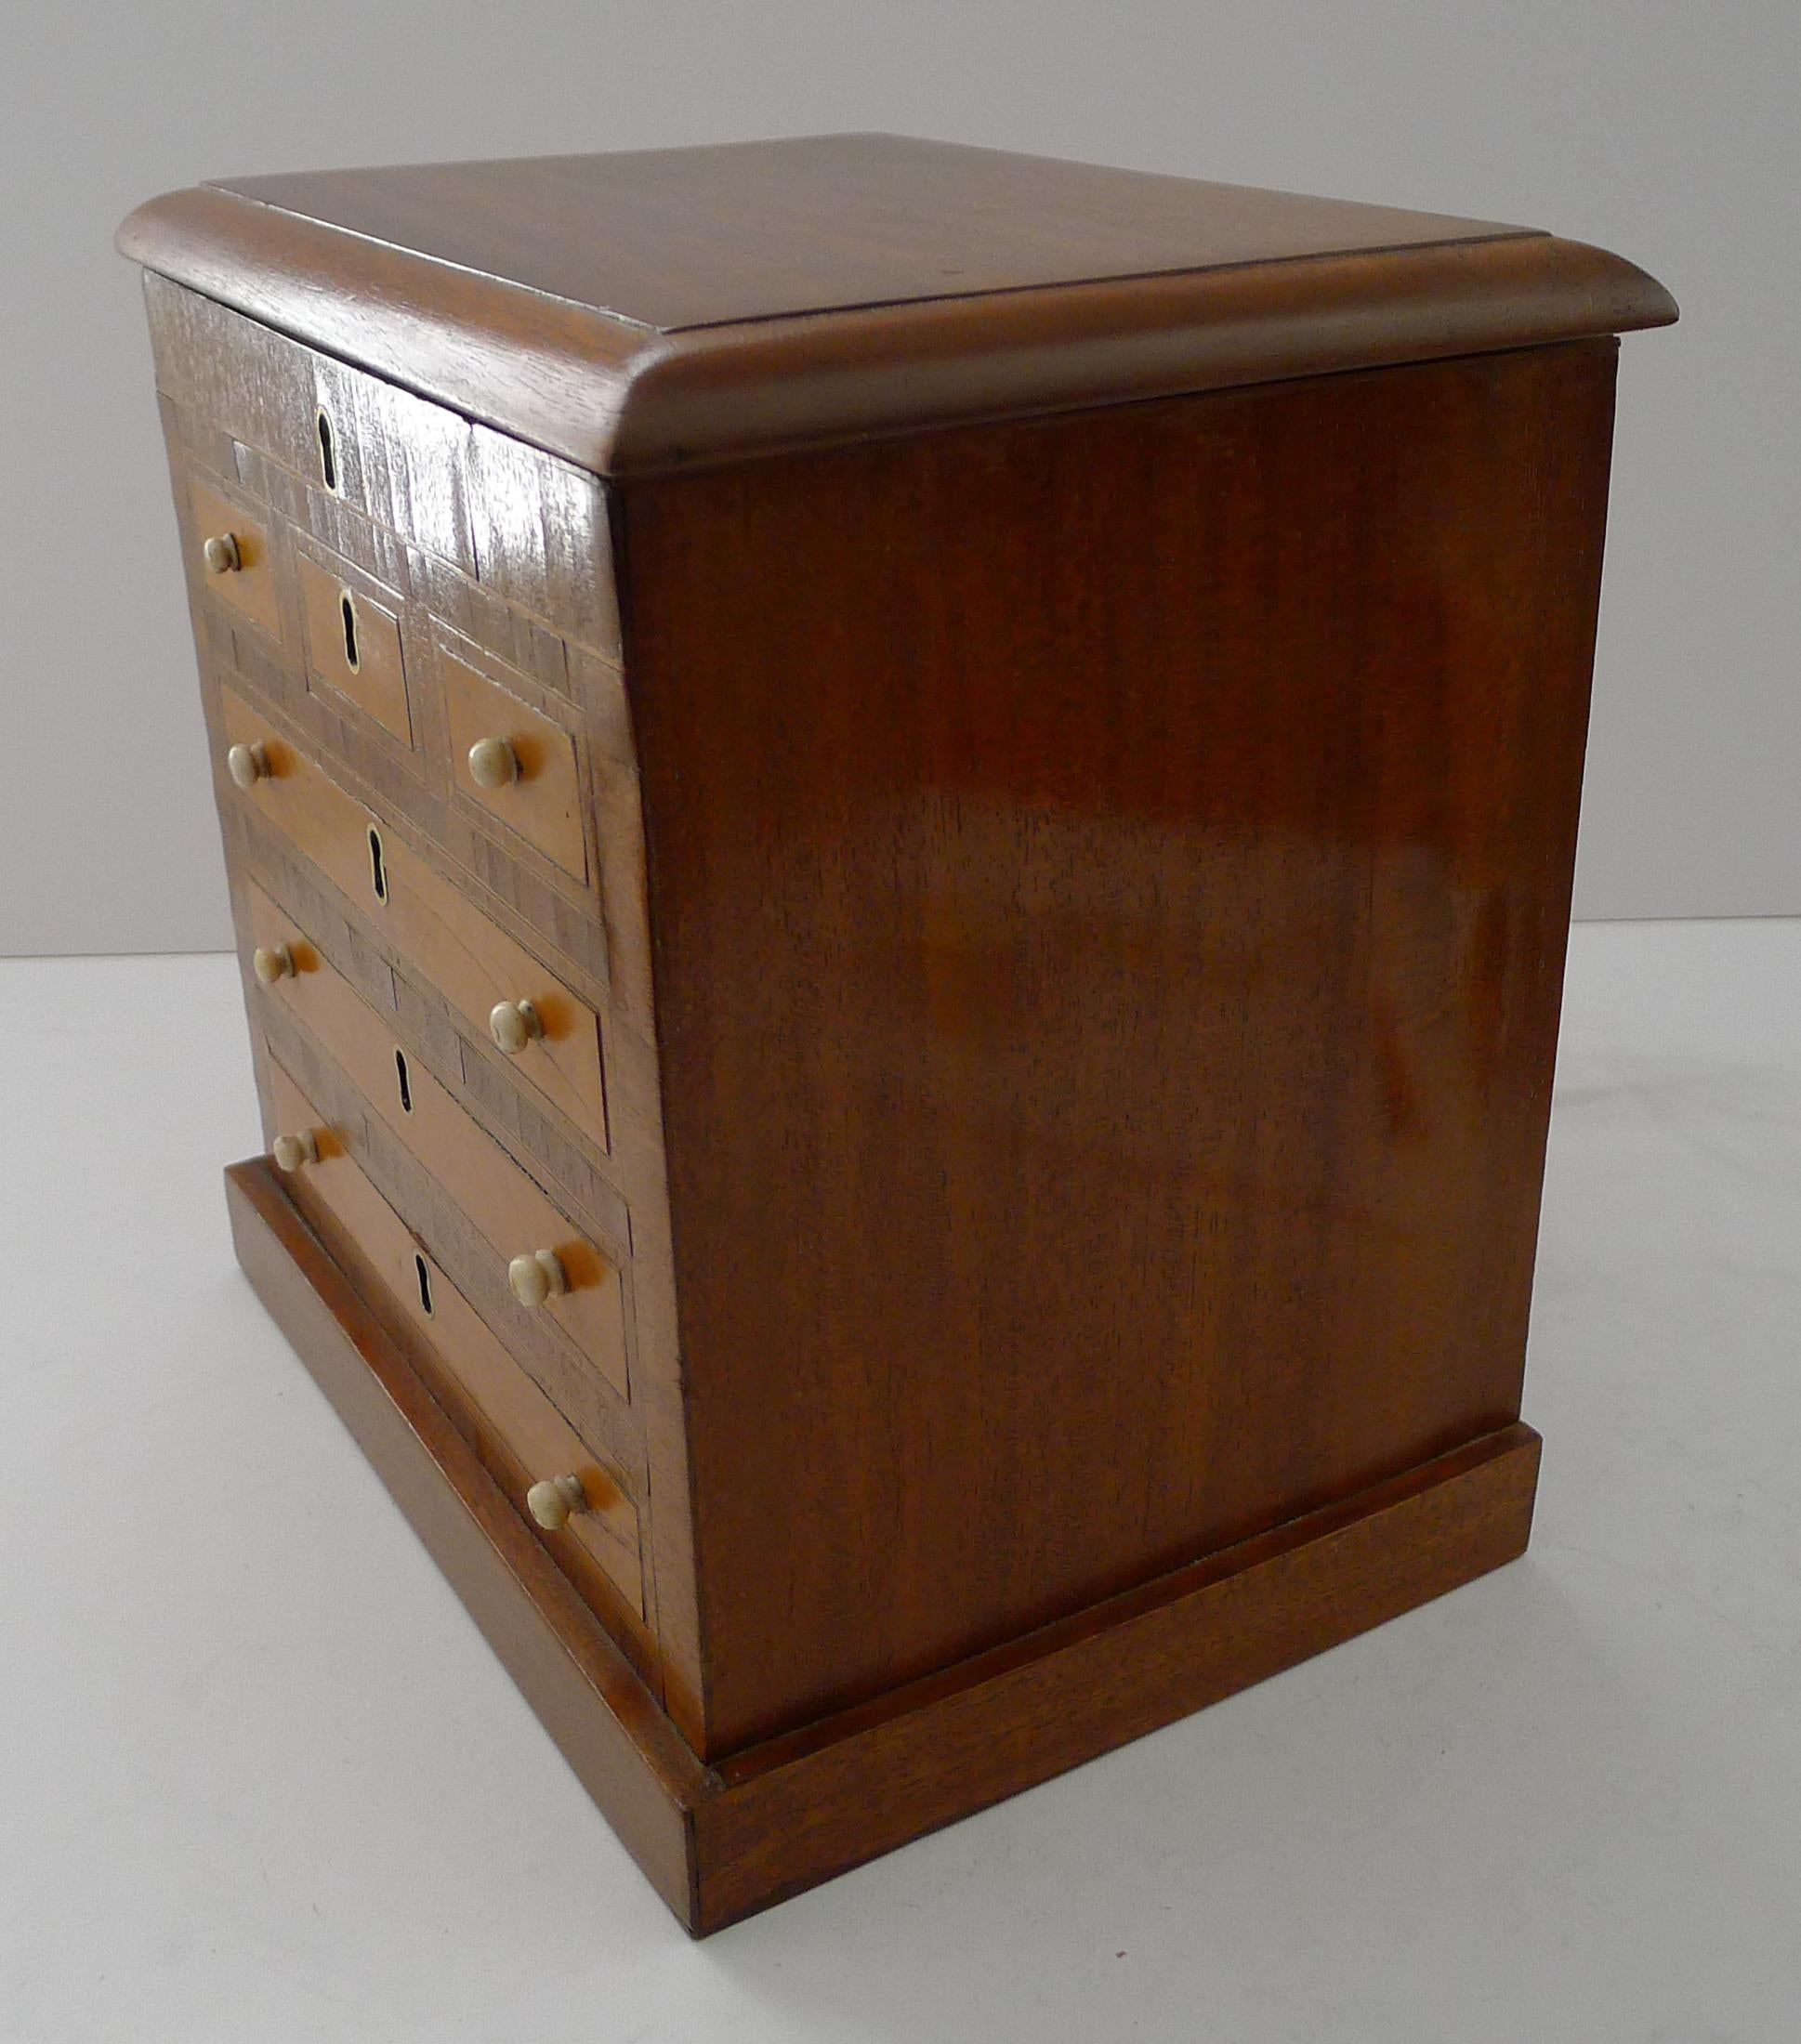 Rare English Mahogany Tea Caddy - Form of Chest of Drawers c.1880 For Sale 3